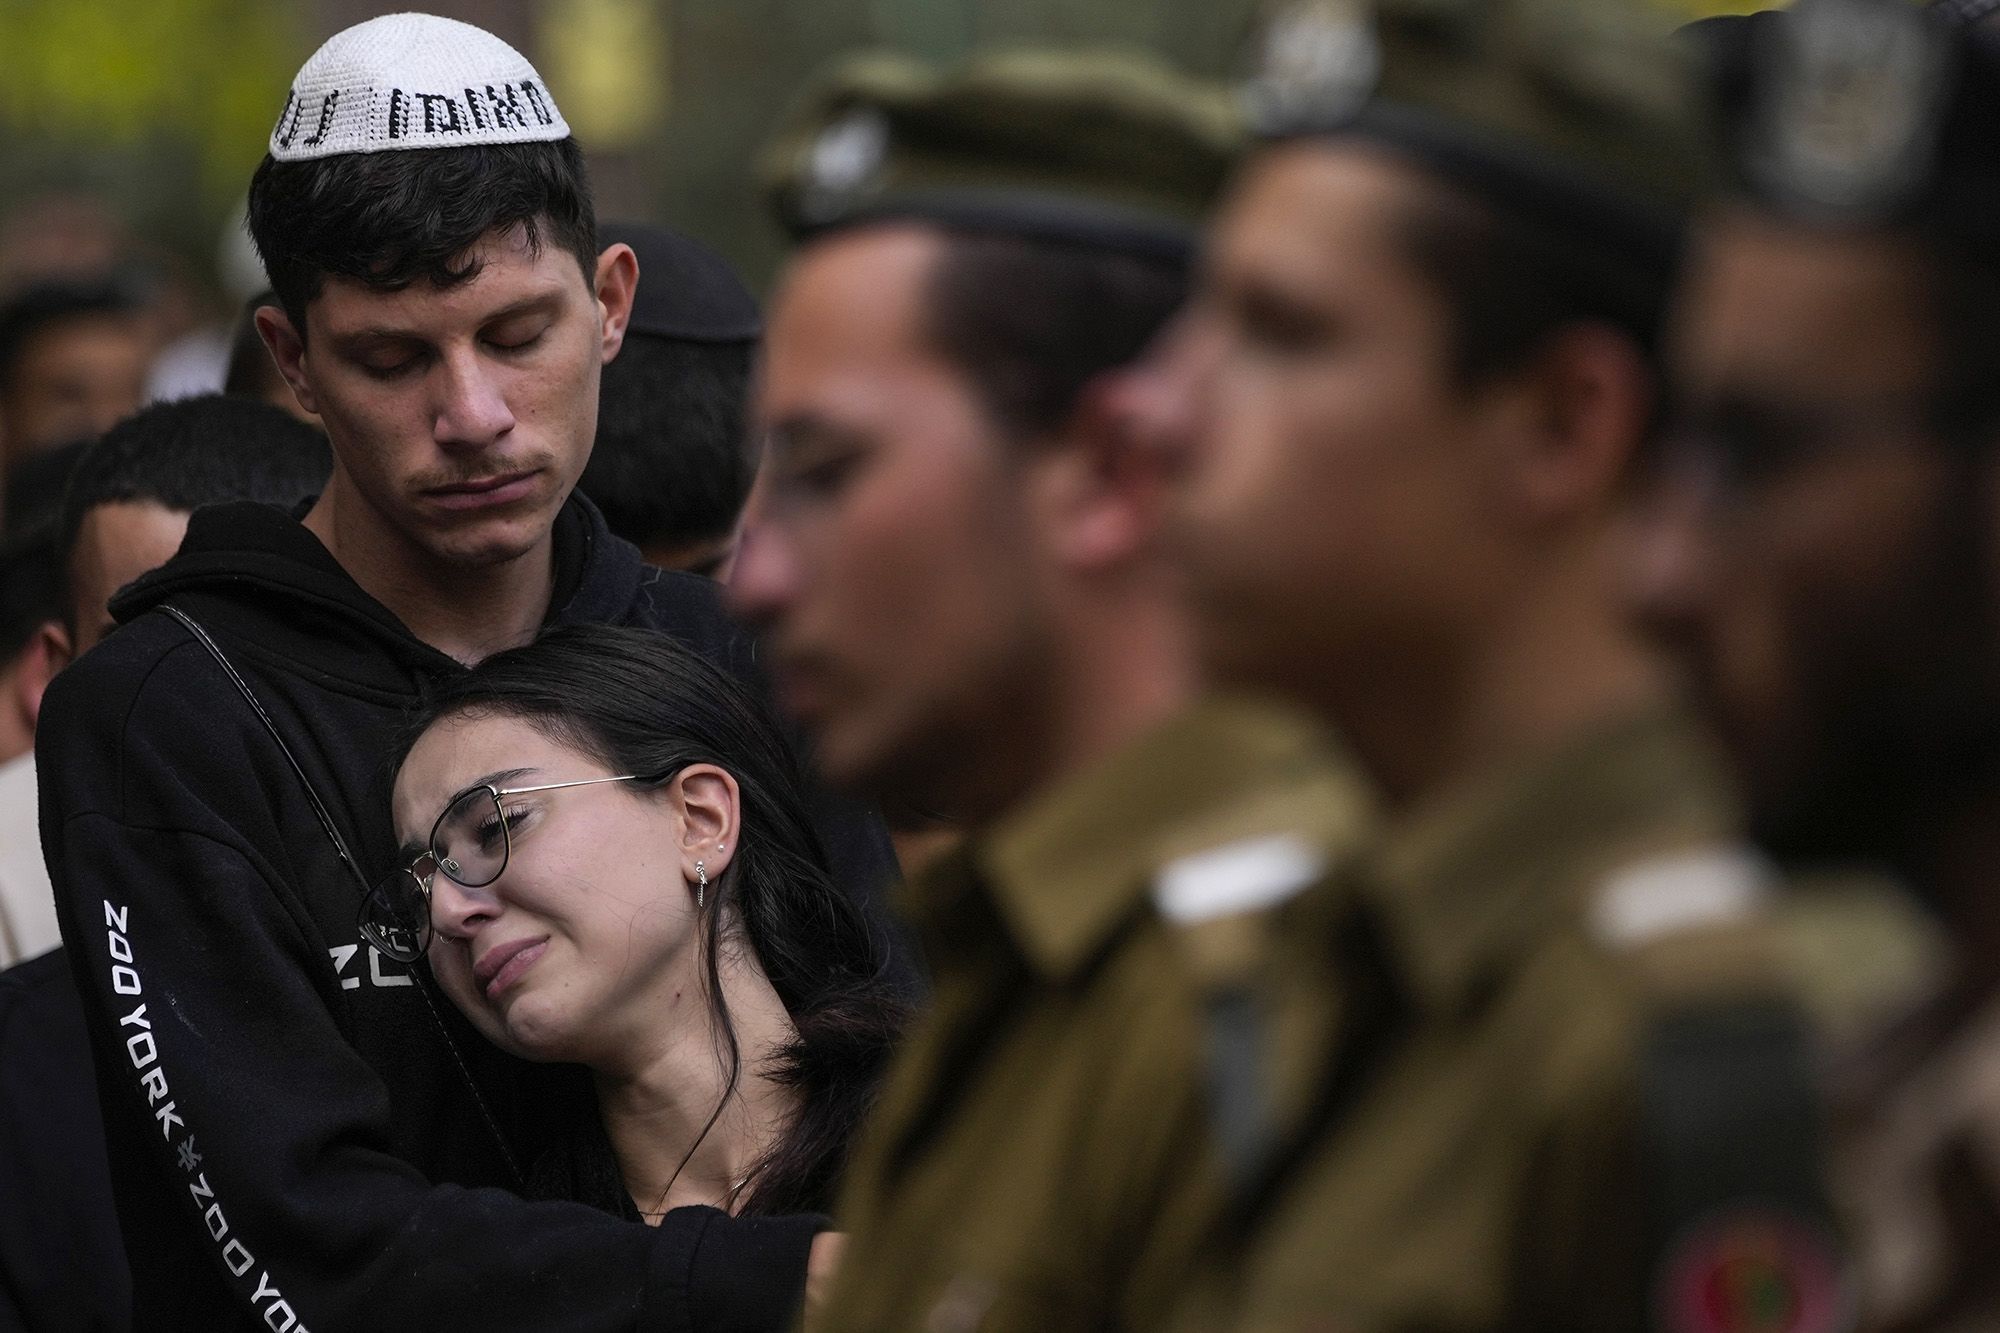 Mourners attend the funeral of Israeli soldier Abraham Cohen at the Mount Herzl cemetery in Jerusalem on Thursday, October 12.